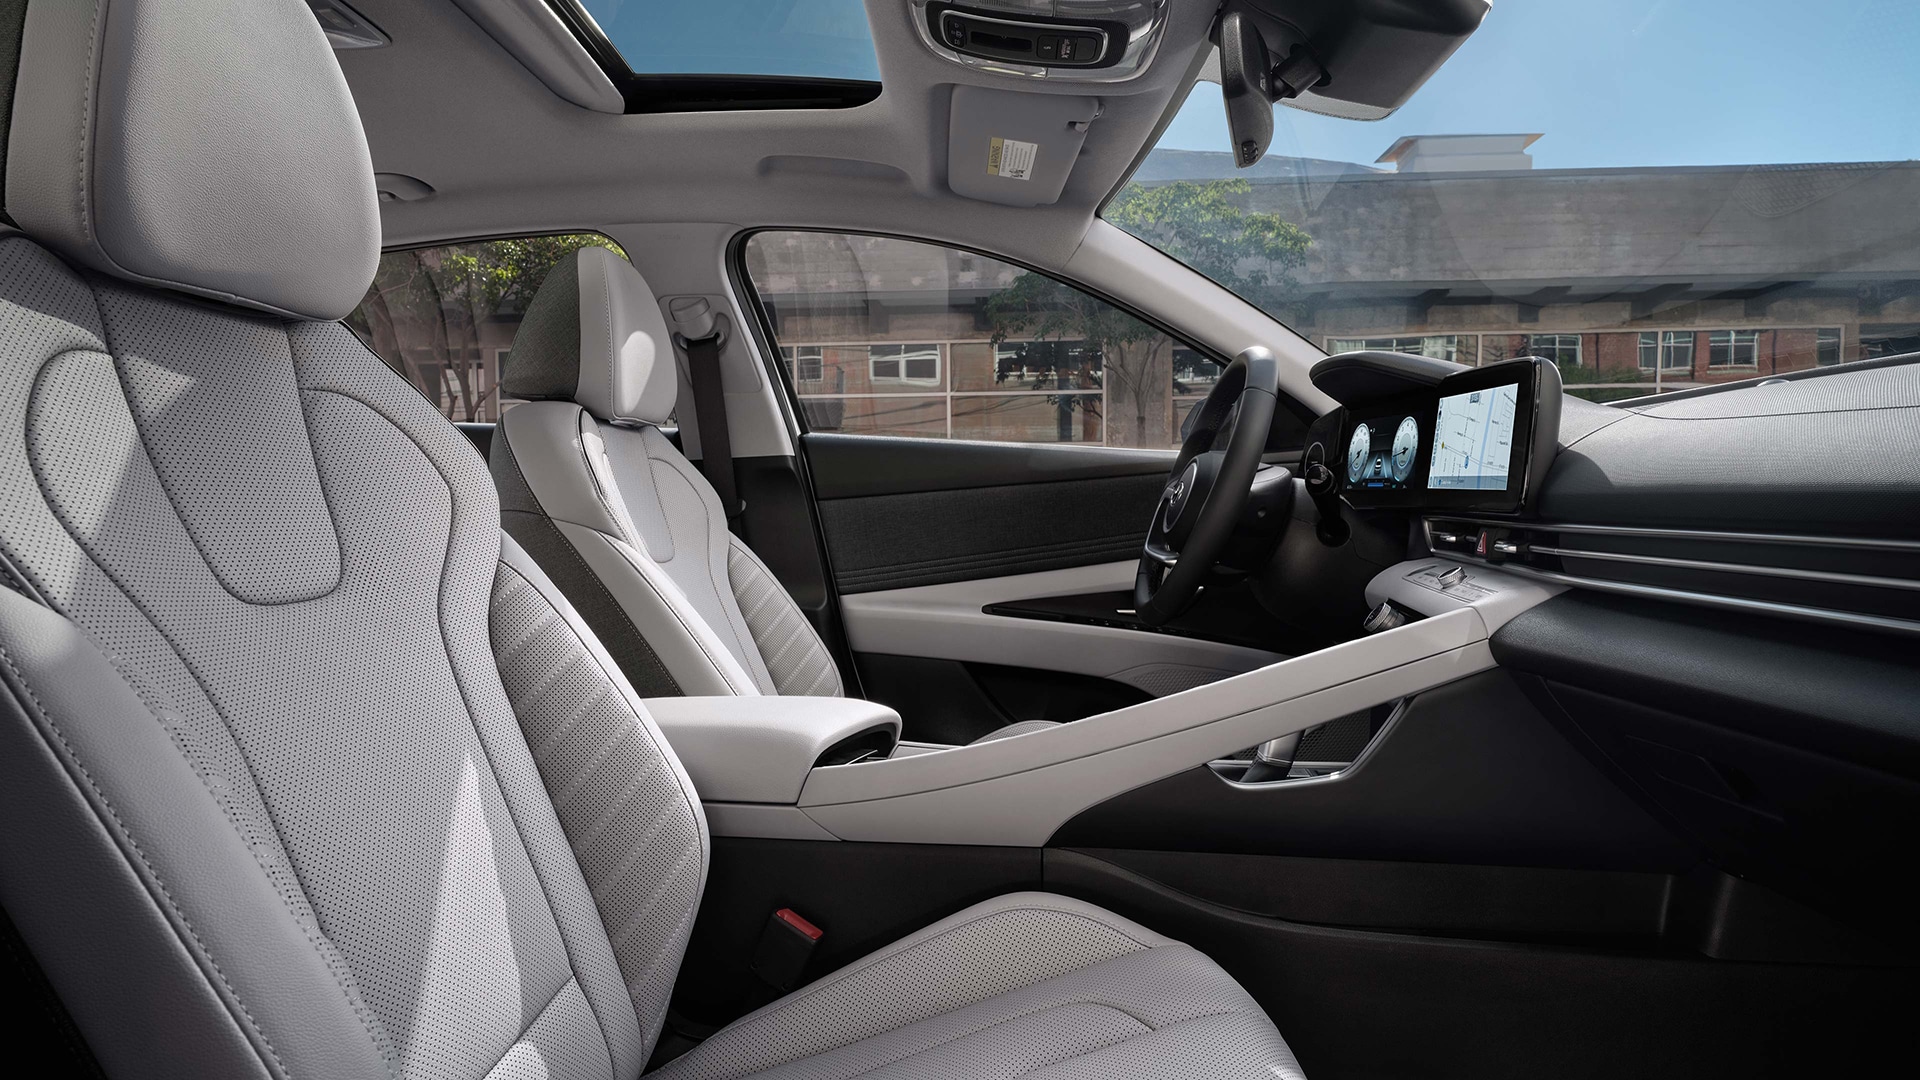 Side interior view of the 2022 Elantra in light grey leather